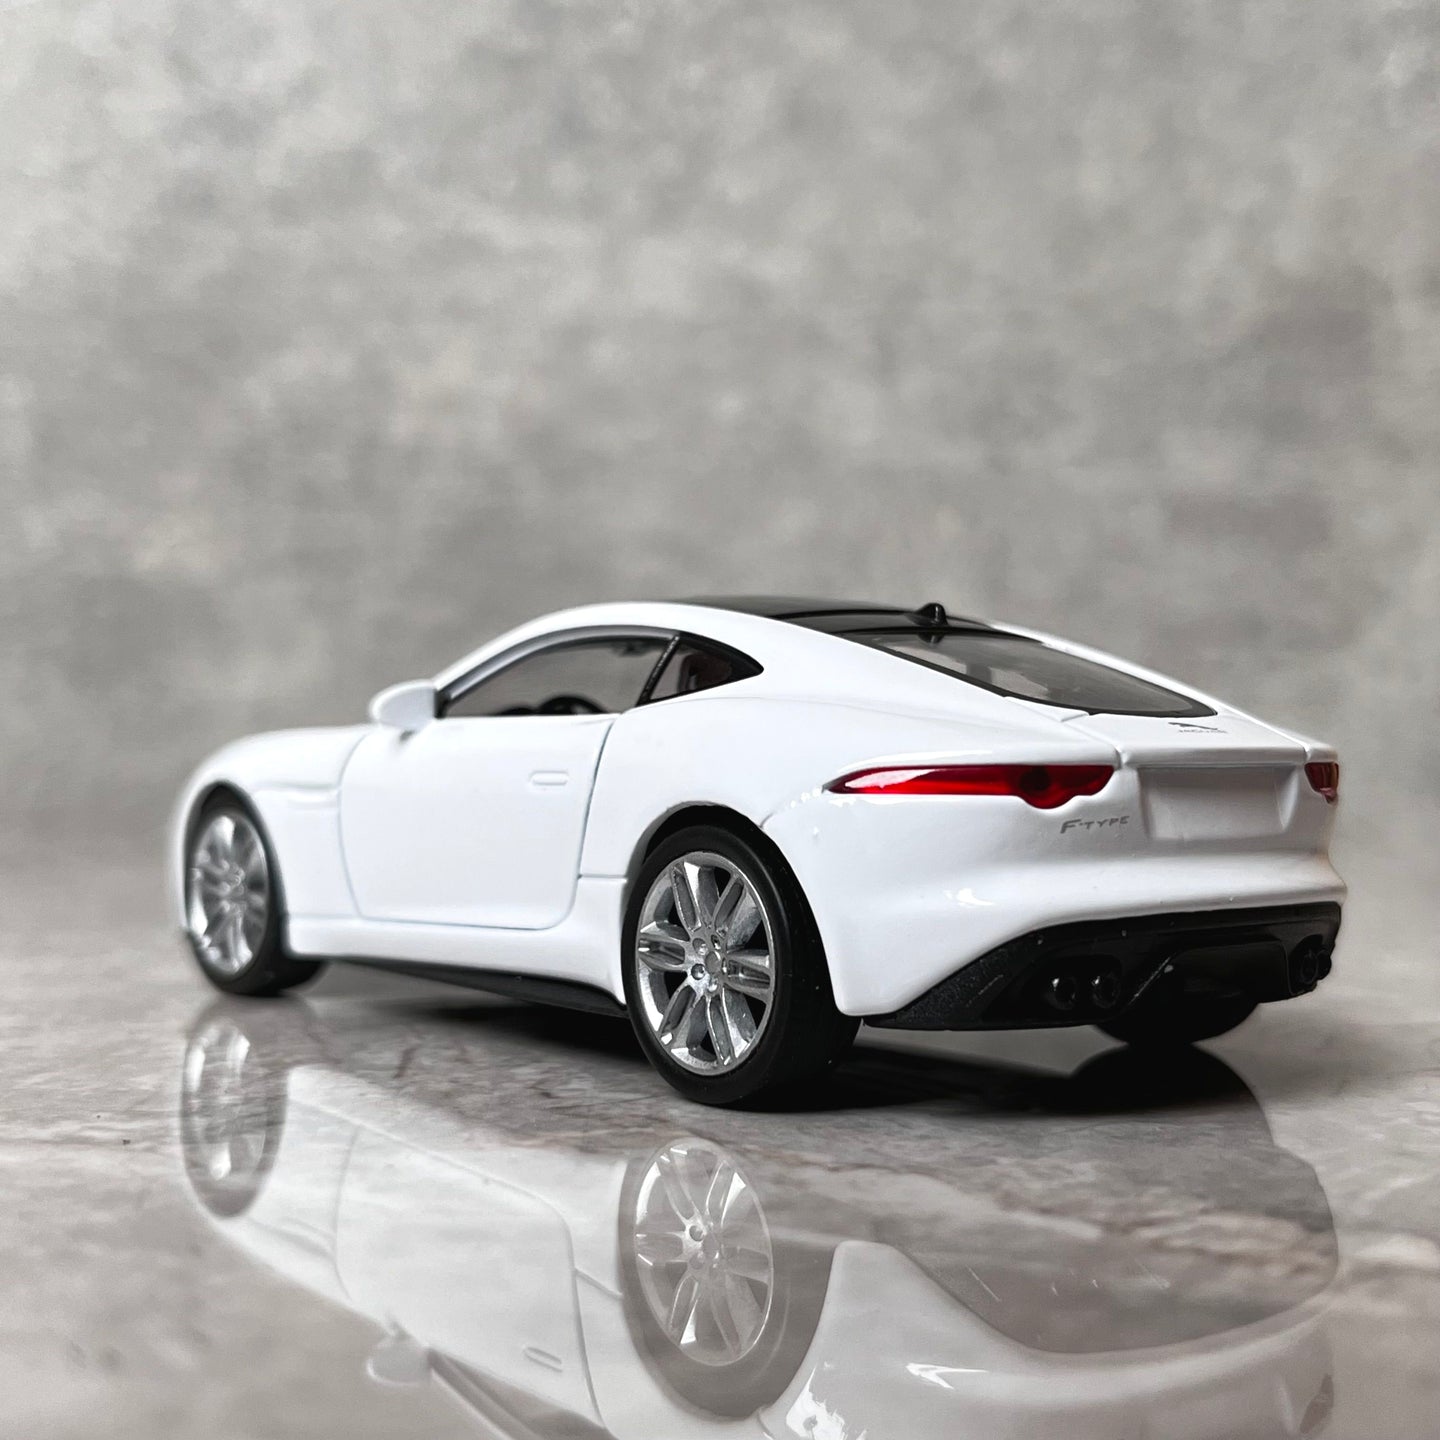 1:36 Jaguar F-Type Coupe Diecast Car Model By Welly